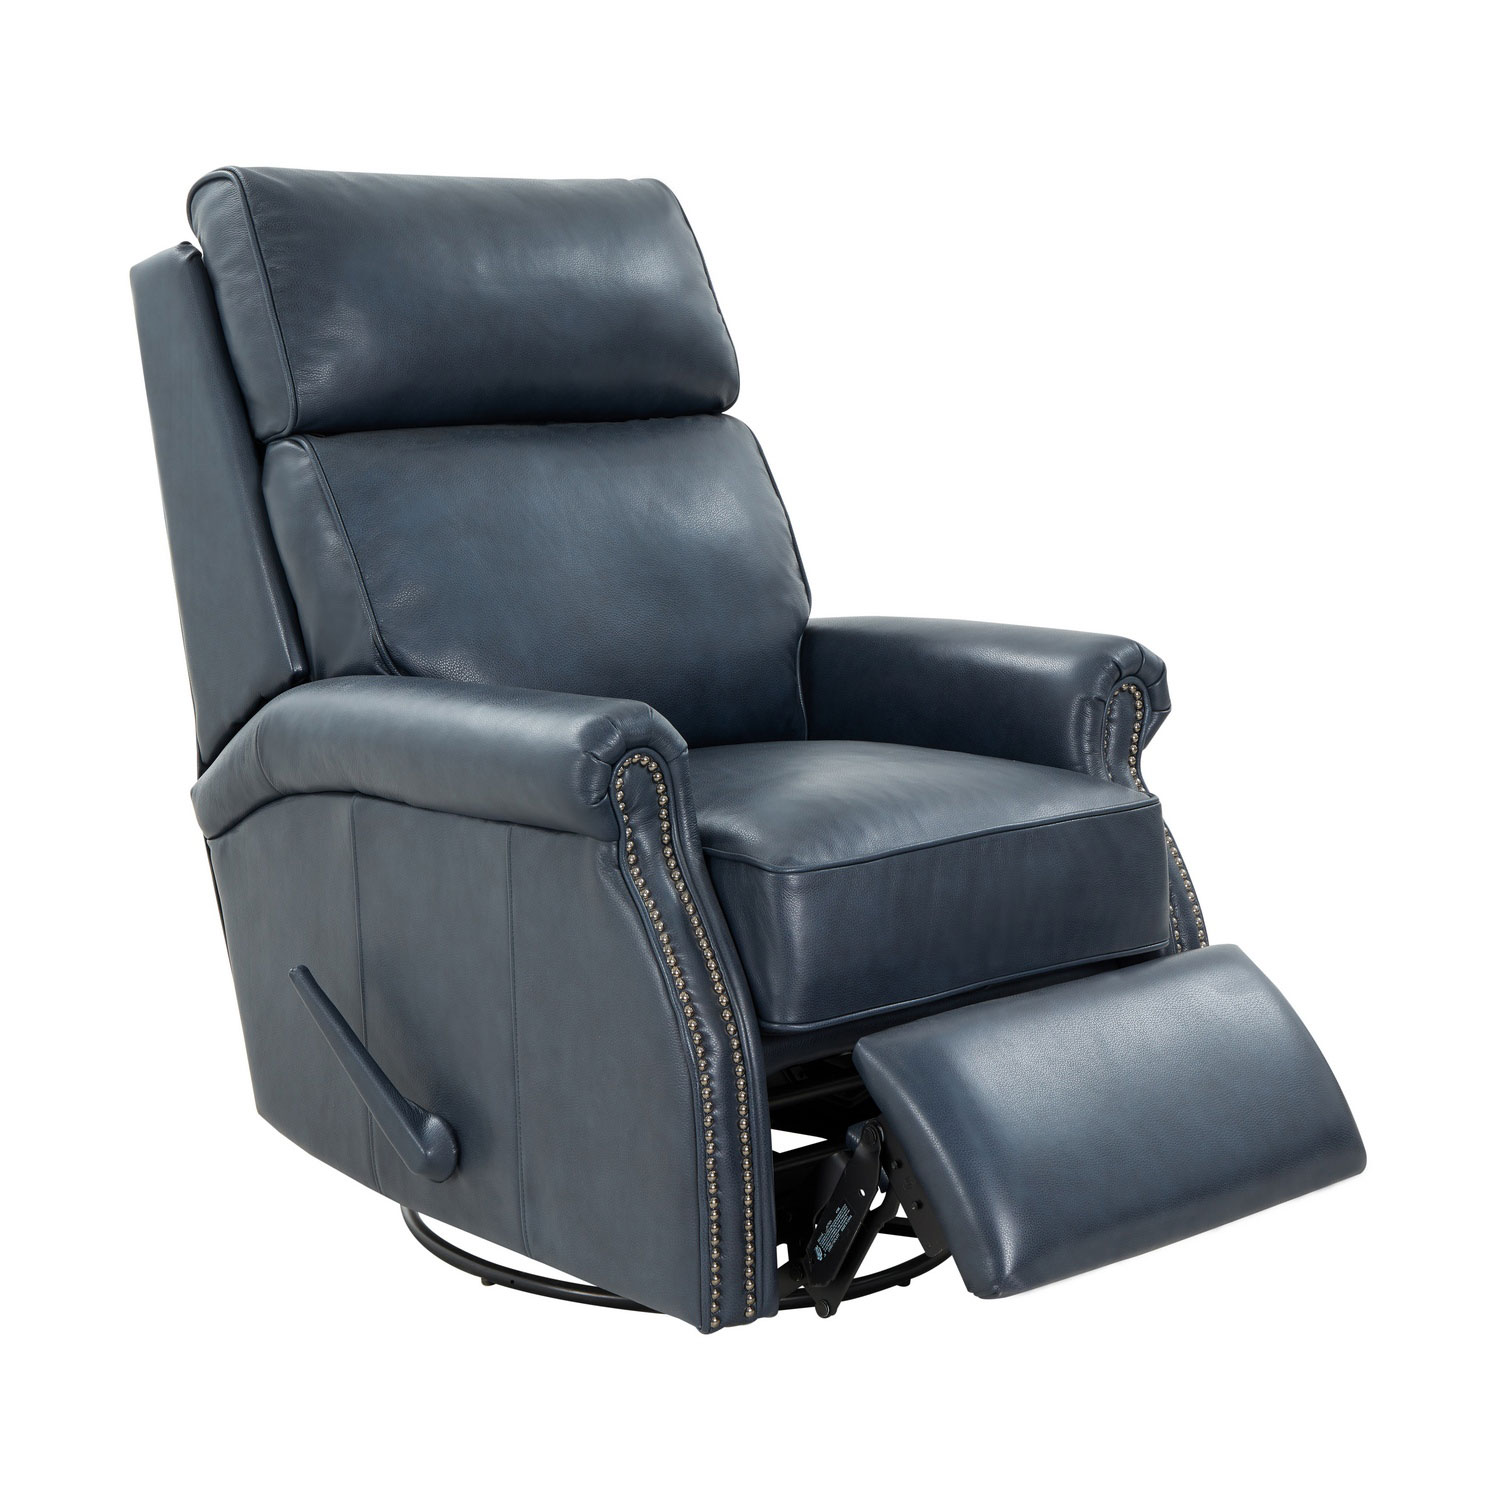 Barcalounger Crews Swivel Glider Recliner Chair - Barone Navy Blue/All Leather